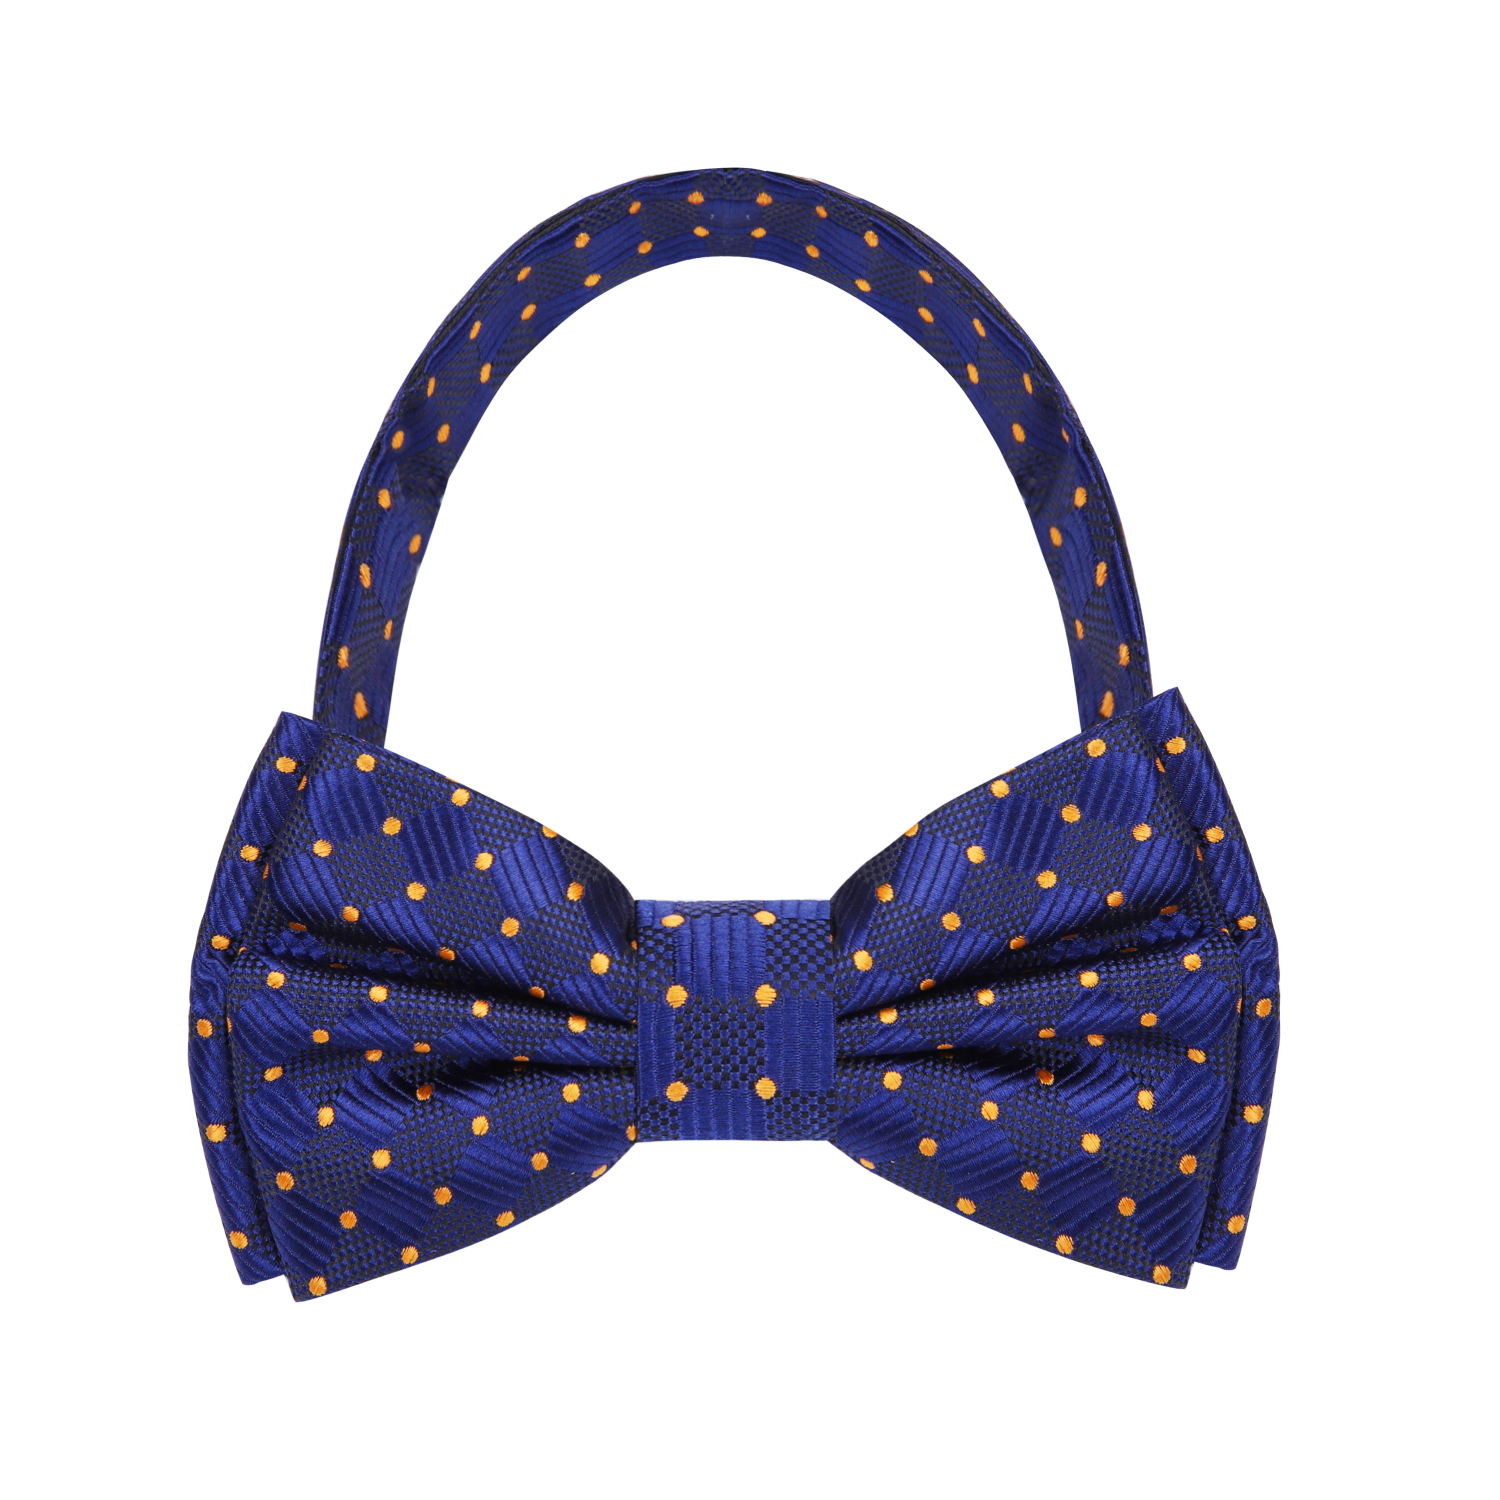 Pacer Geometric Bow Tie